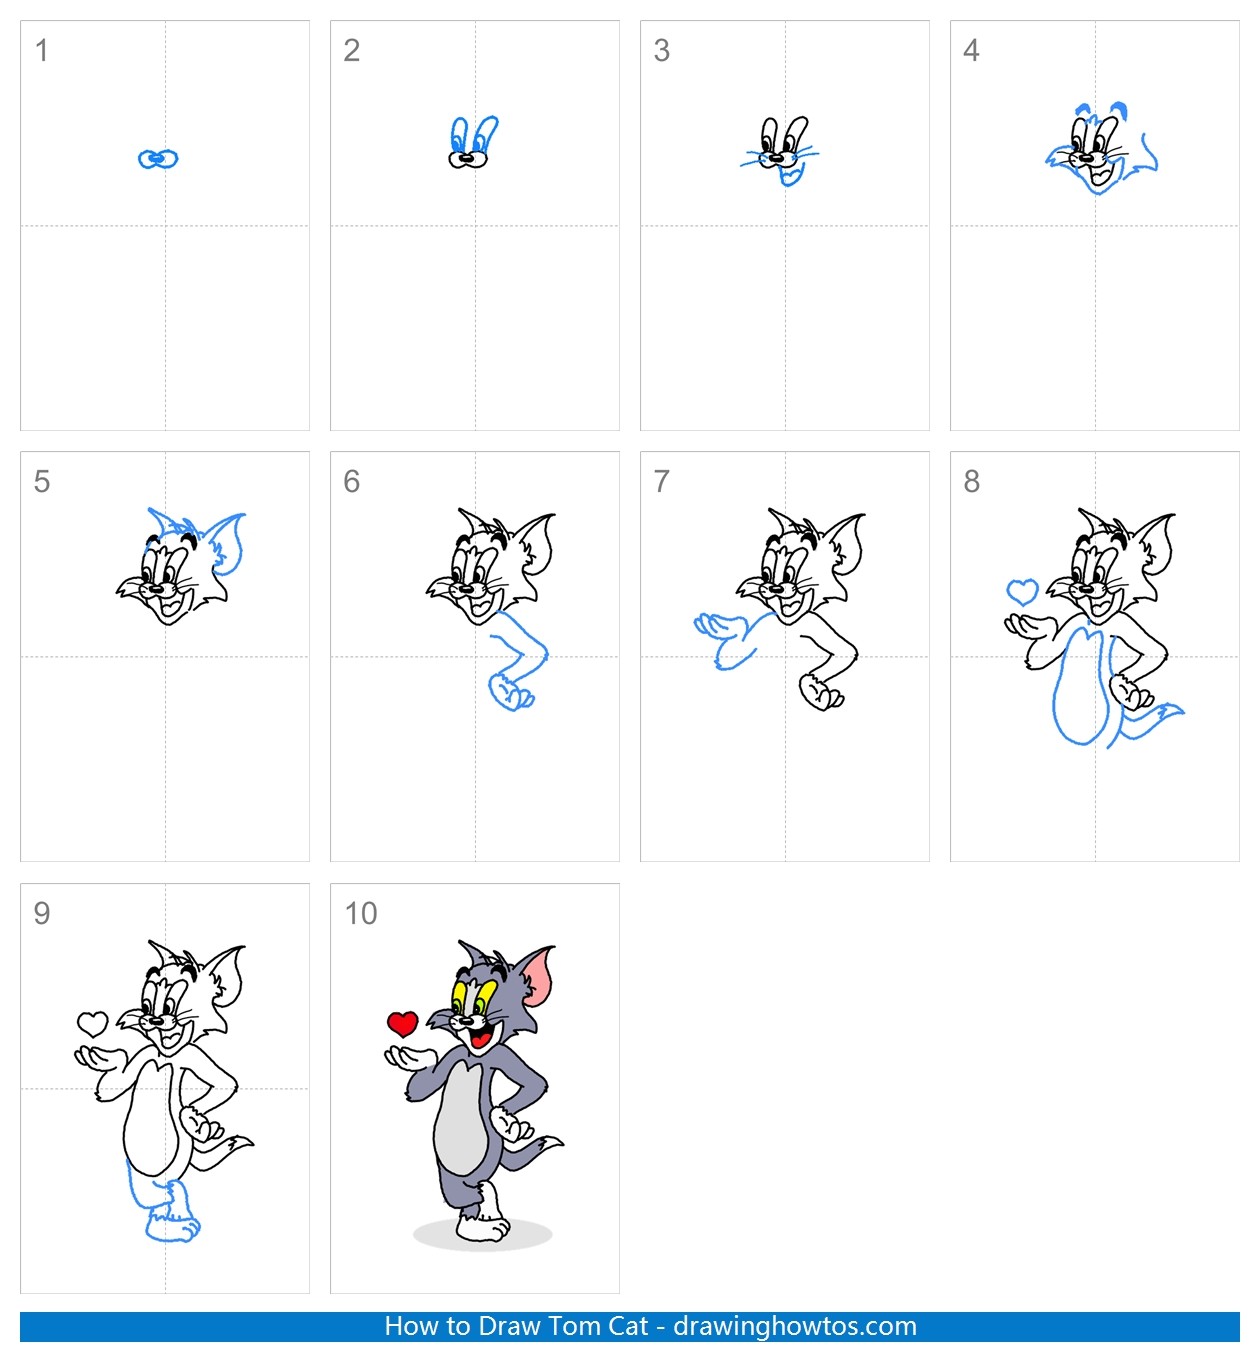 How to Draw Tom Cat Step by Step